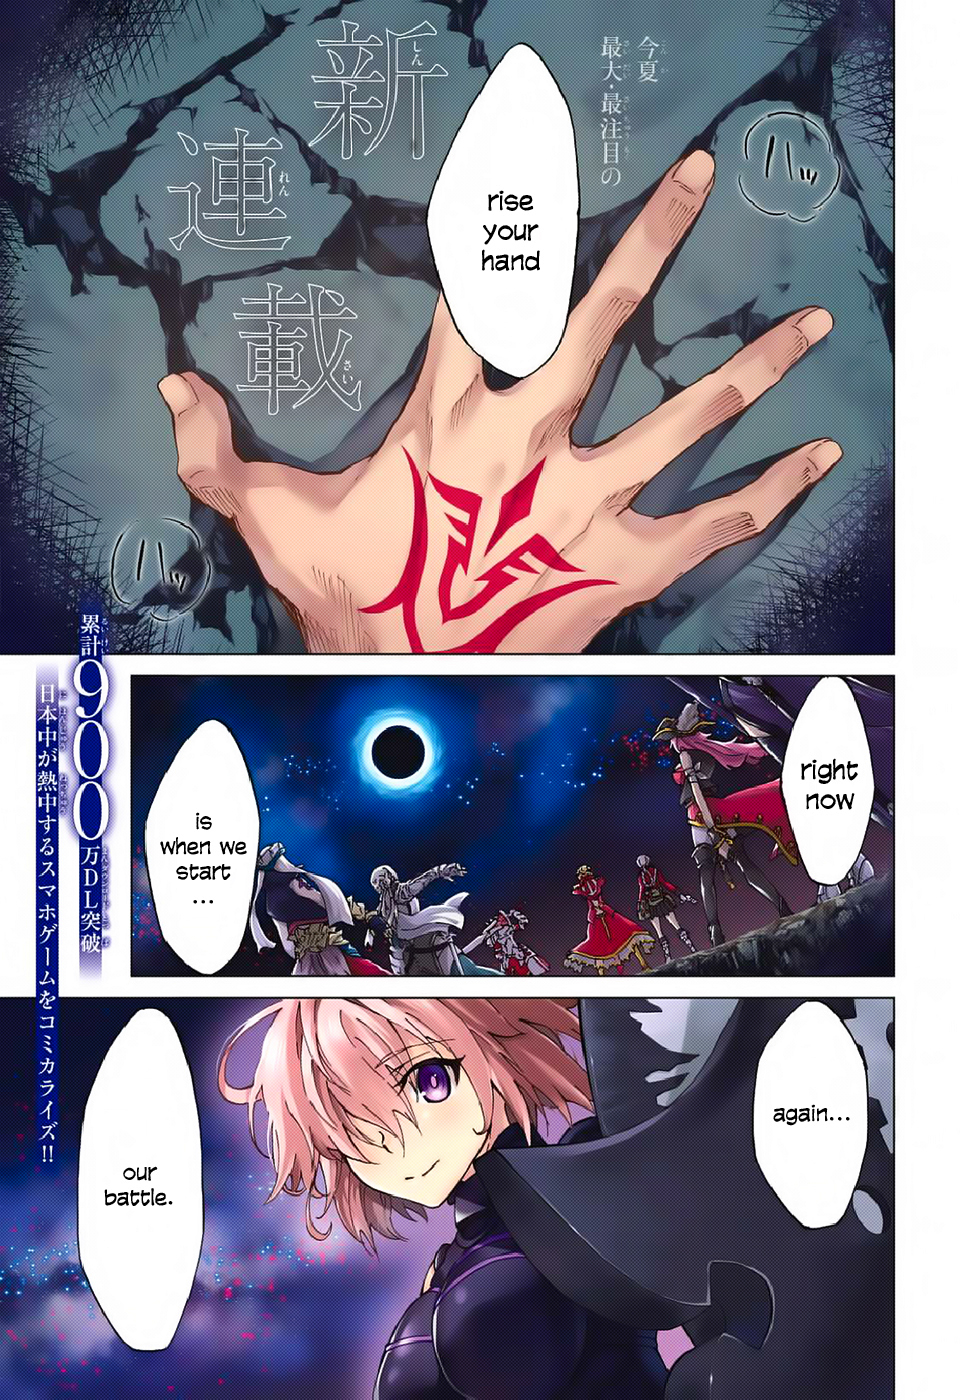 Fate/grand Order -Turas Réalta- - Page 1